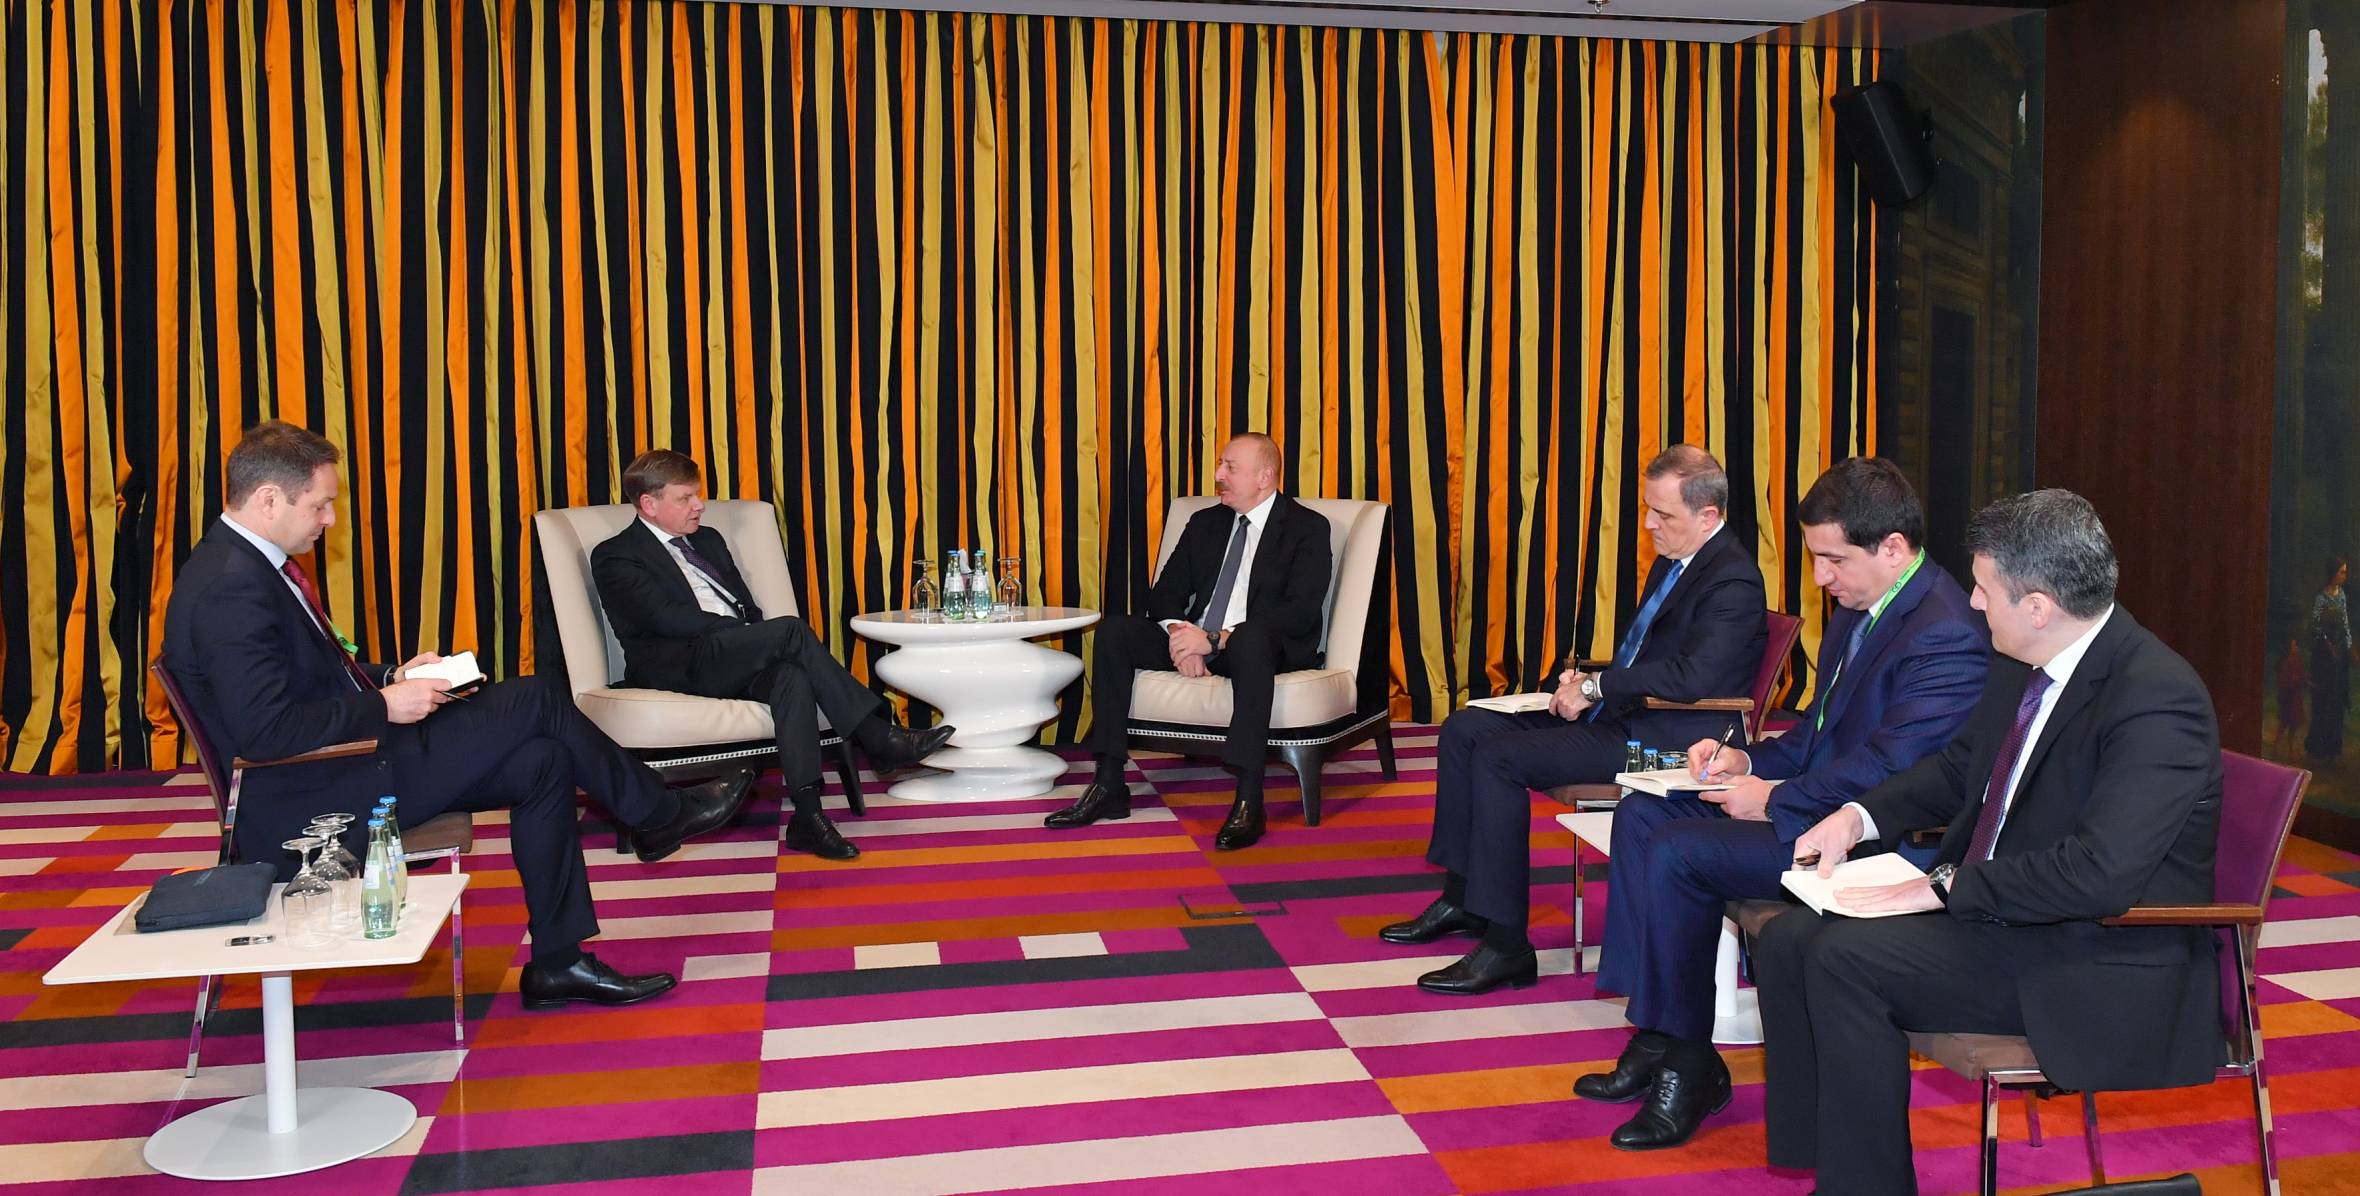 Ilham Aliyev met with Chairman of Bundestag’s Parliamentary Friendship Group for Relations with States of Southern Caucasus in Munich